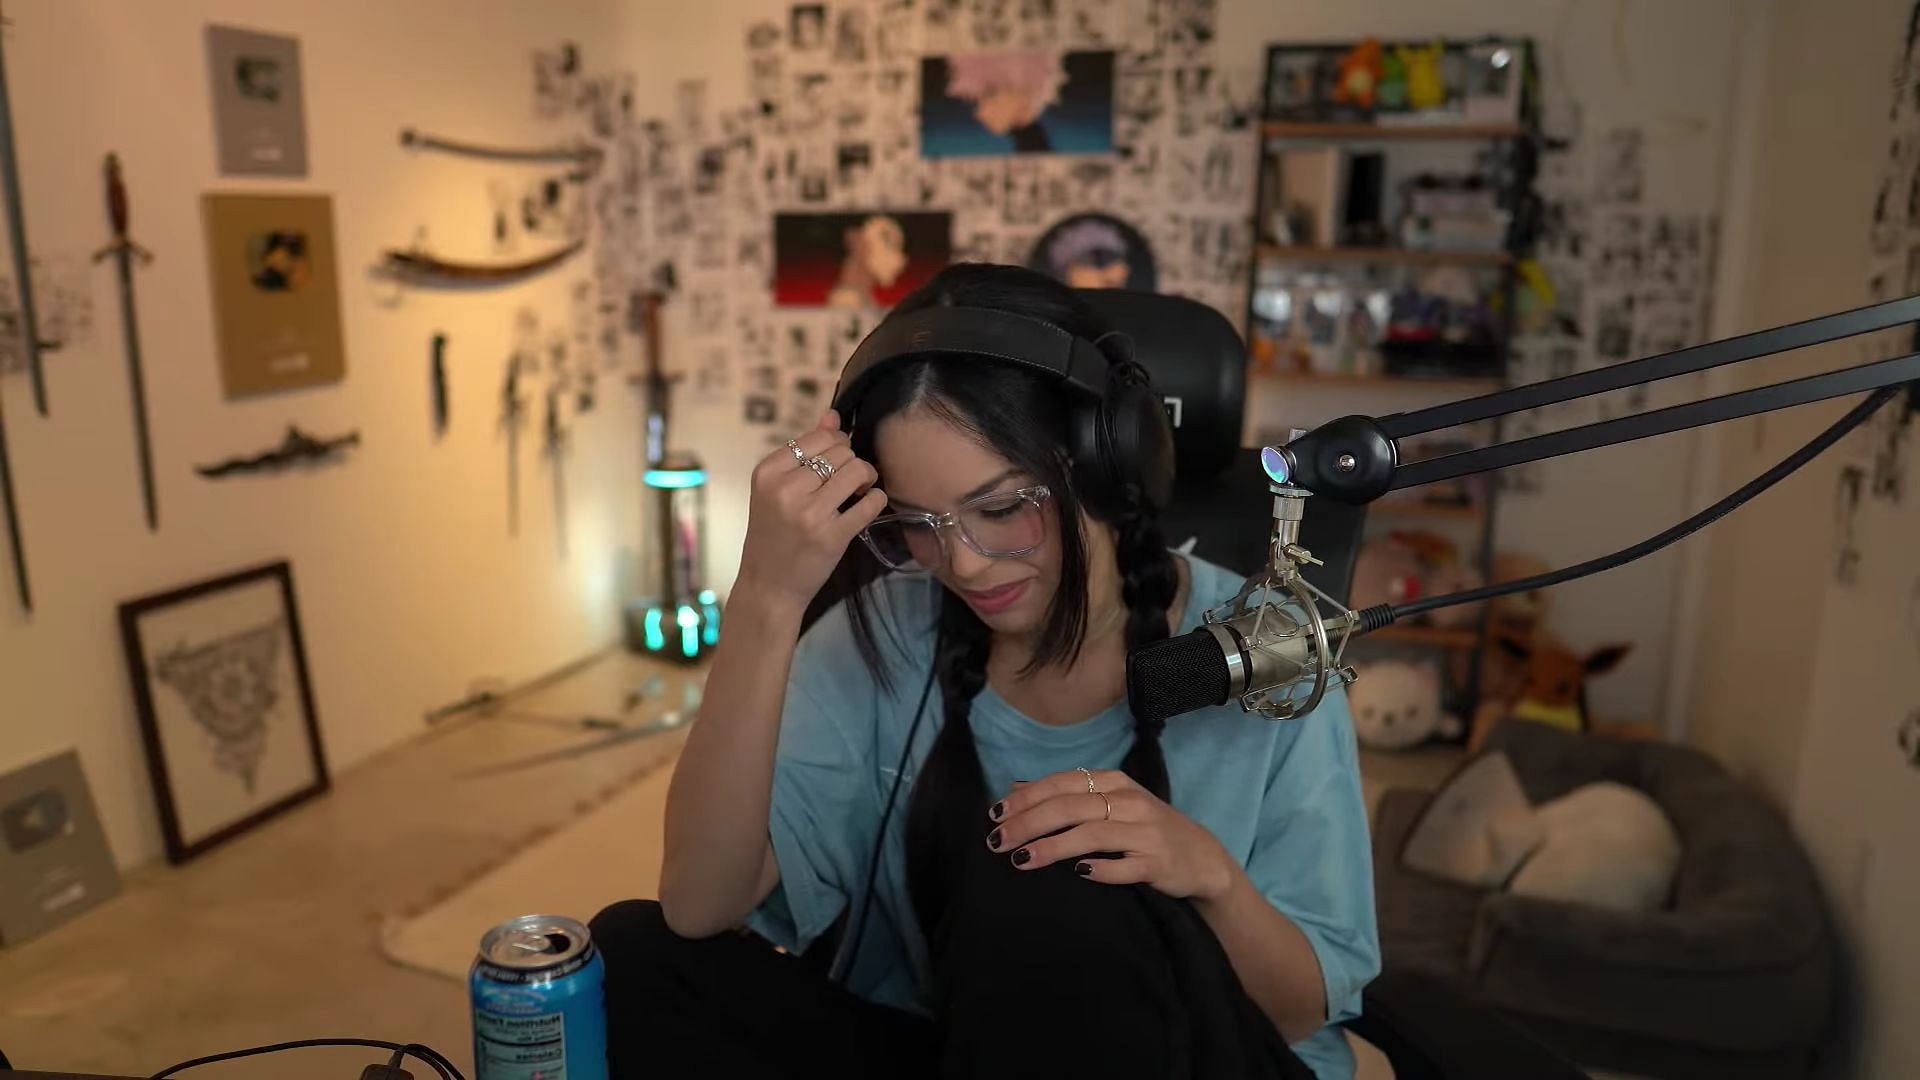 &quot;It&rsquo;s gross&quot;: Valkyrae reveals how she avoids doing anything beyond gaming-related because &quot;there&#039;s a lot of creepy people out there&quot; (Image via Valkyrae YouTube)